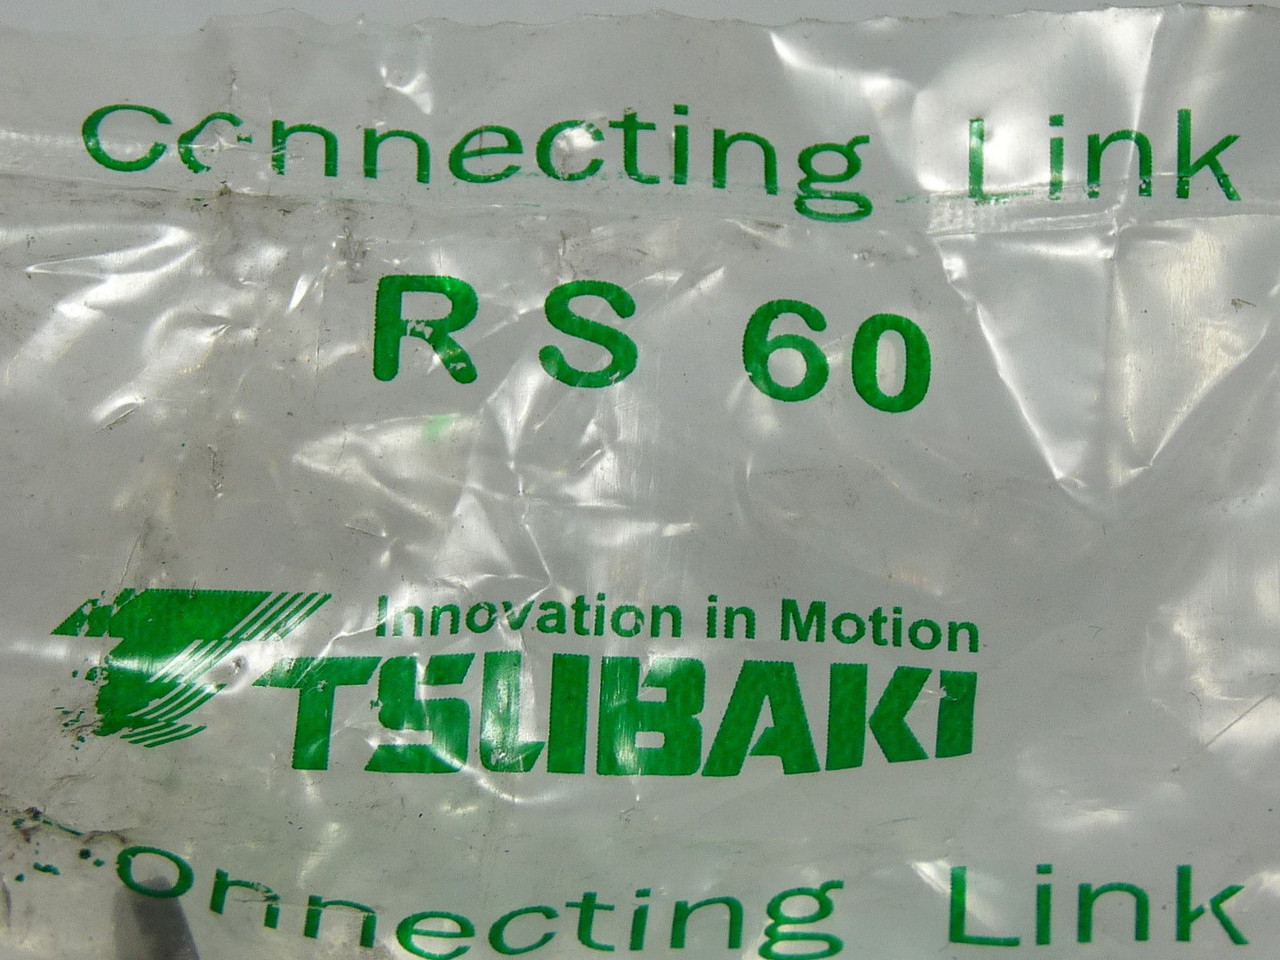 Tsubaki RS60-1-CL Connecting Link ! NEW !